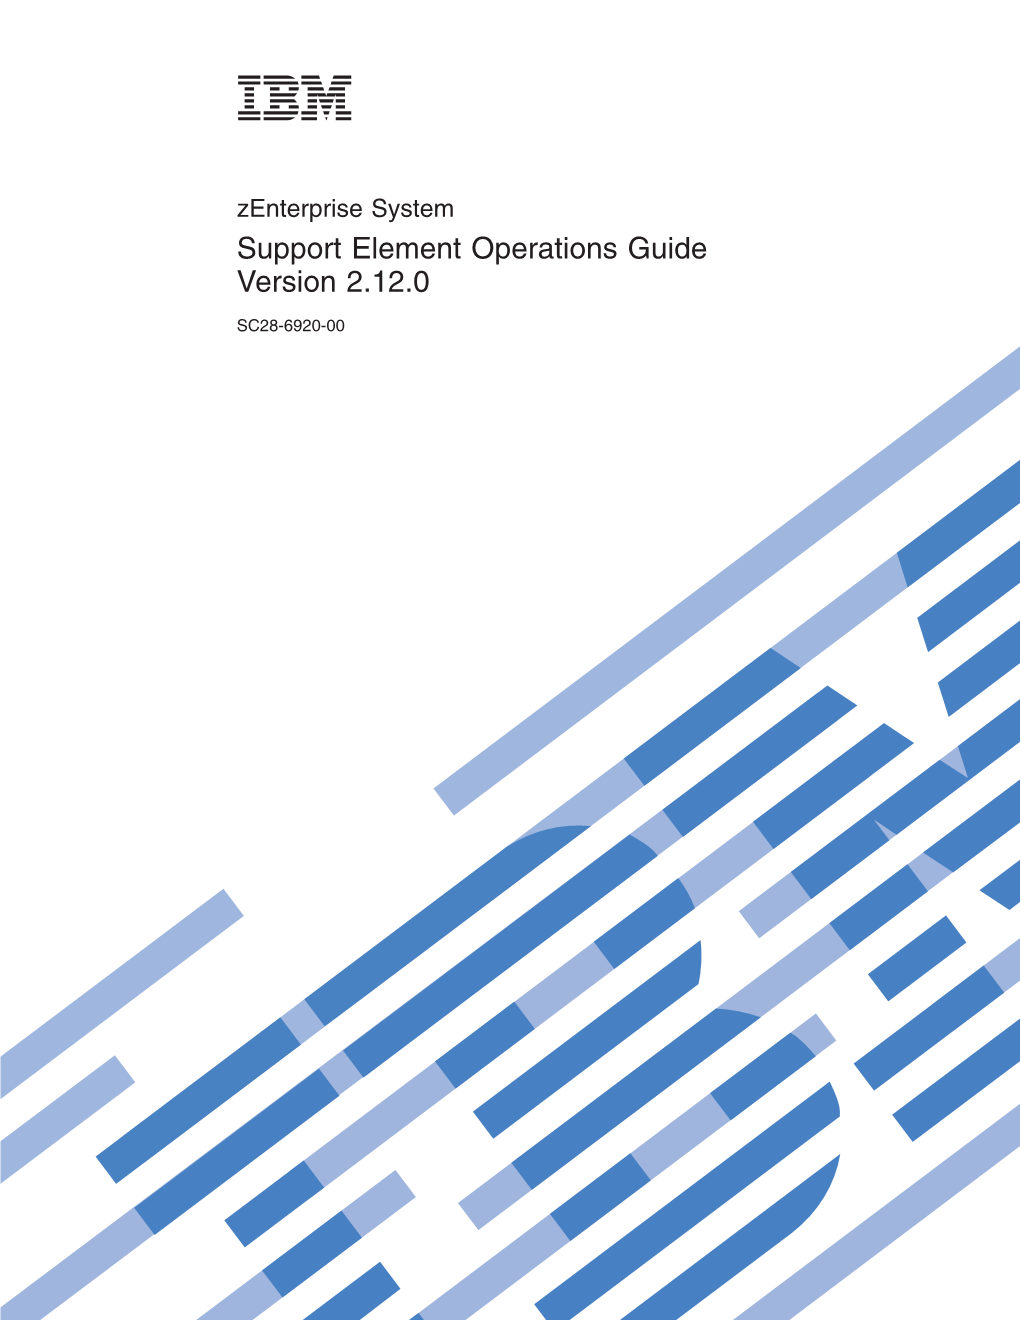 Zenterprise System Support Element Operations Guide Version 2.12.0